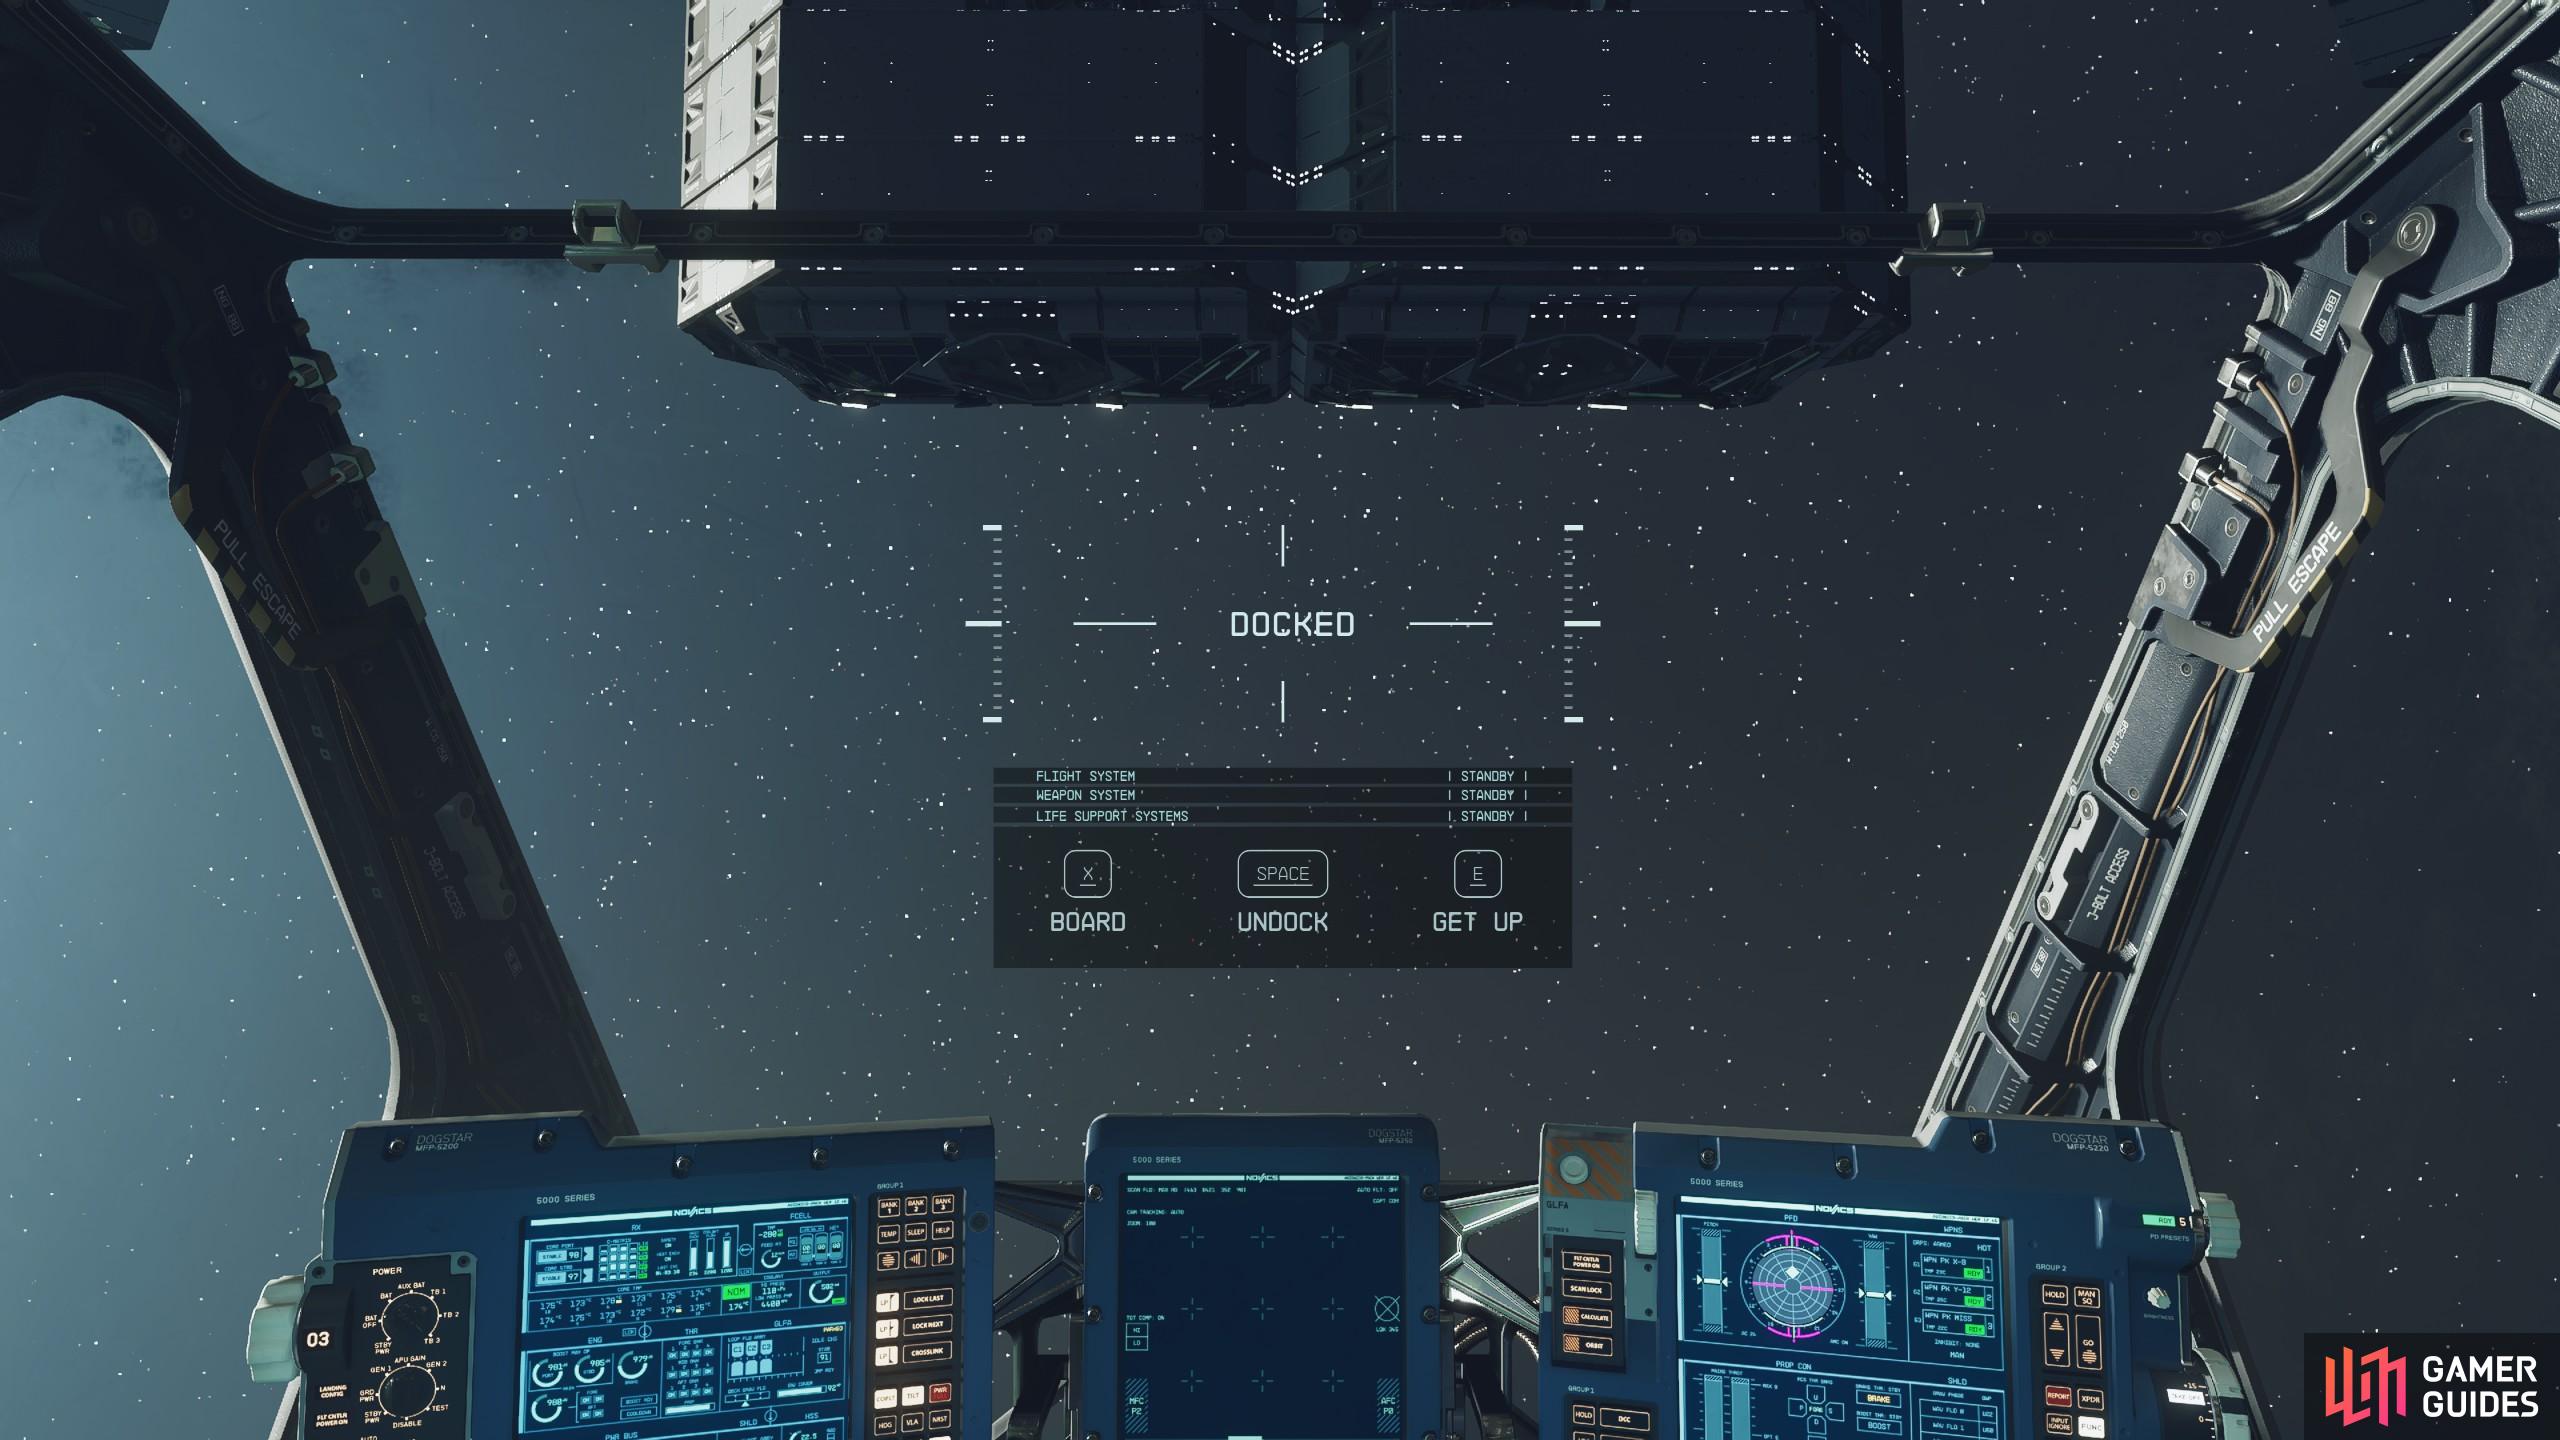 You'll know you're docked when you get this pop-up on your ship's HUD.